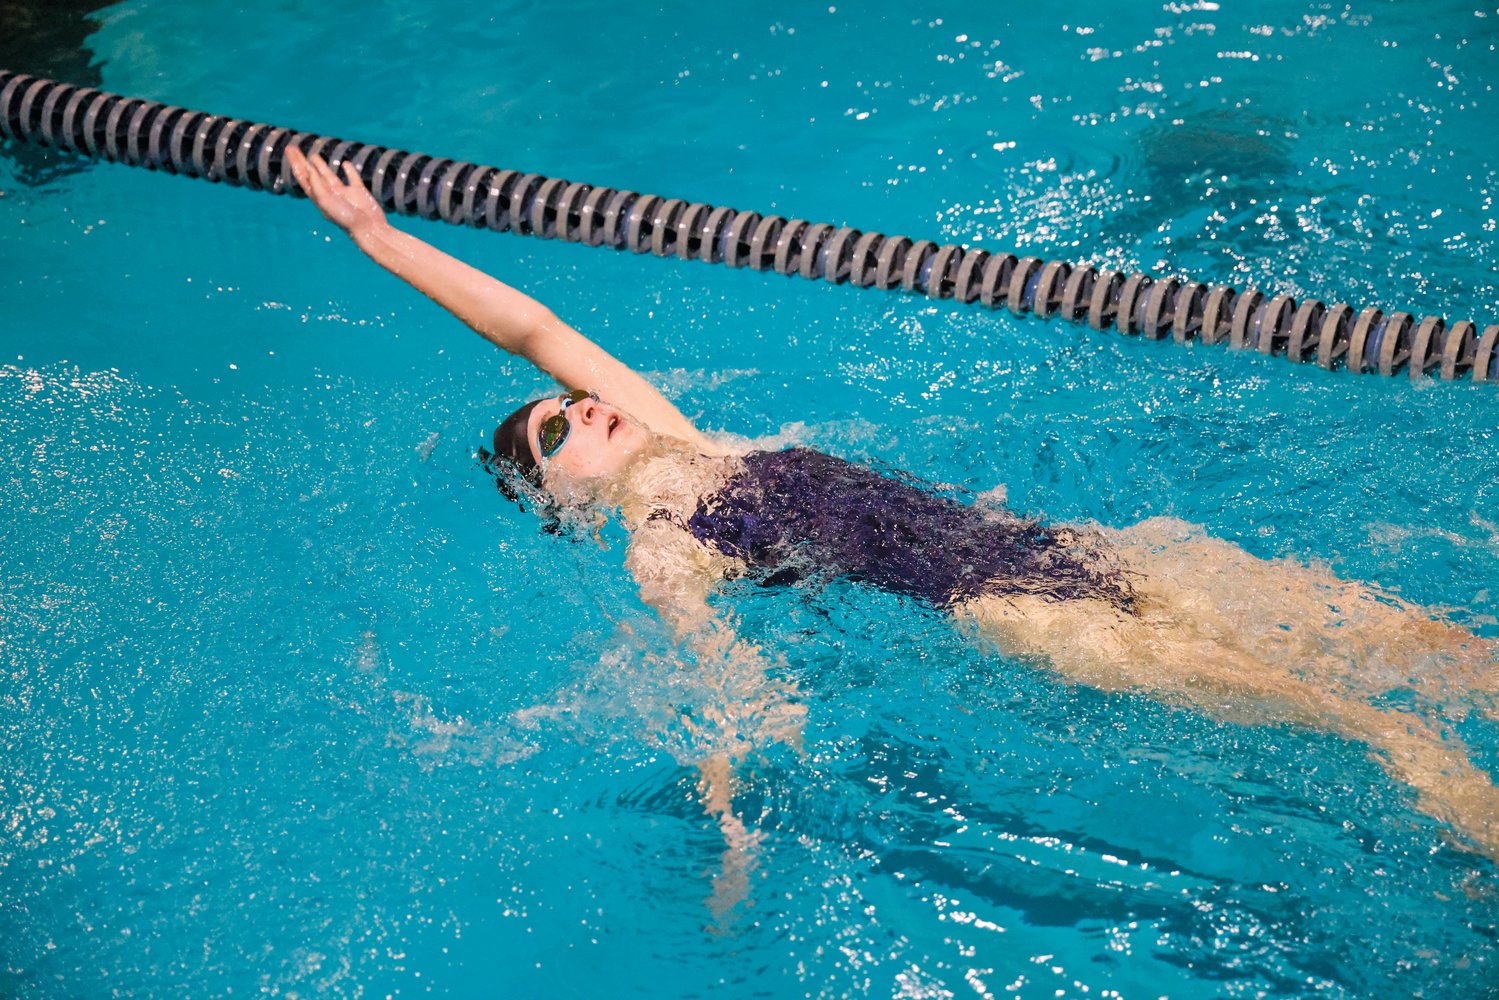 Jordan-Matthews sophomore Sarah Dekaney participates in the women's 100-meter backstroke event at a swim meet in Asheboro last Thursday. She placed 10th in the event with a time of 2:17.01.